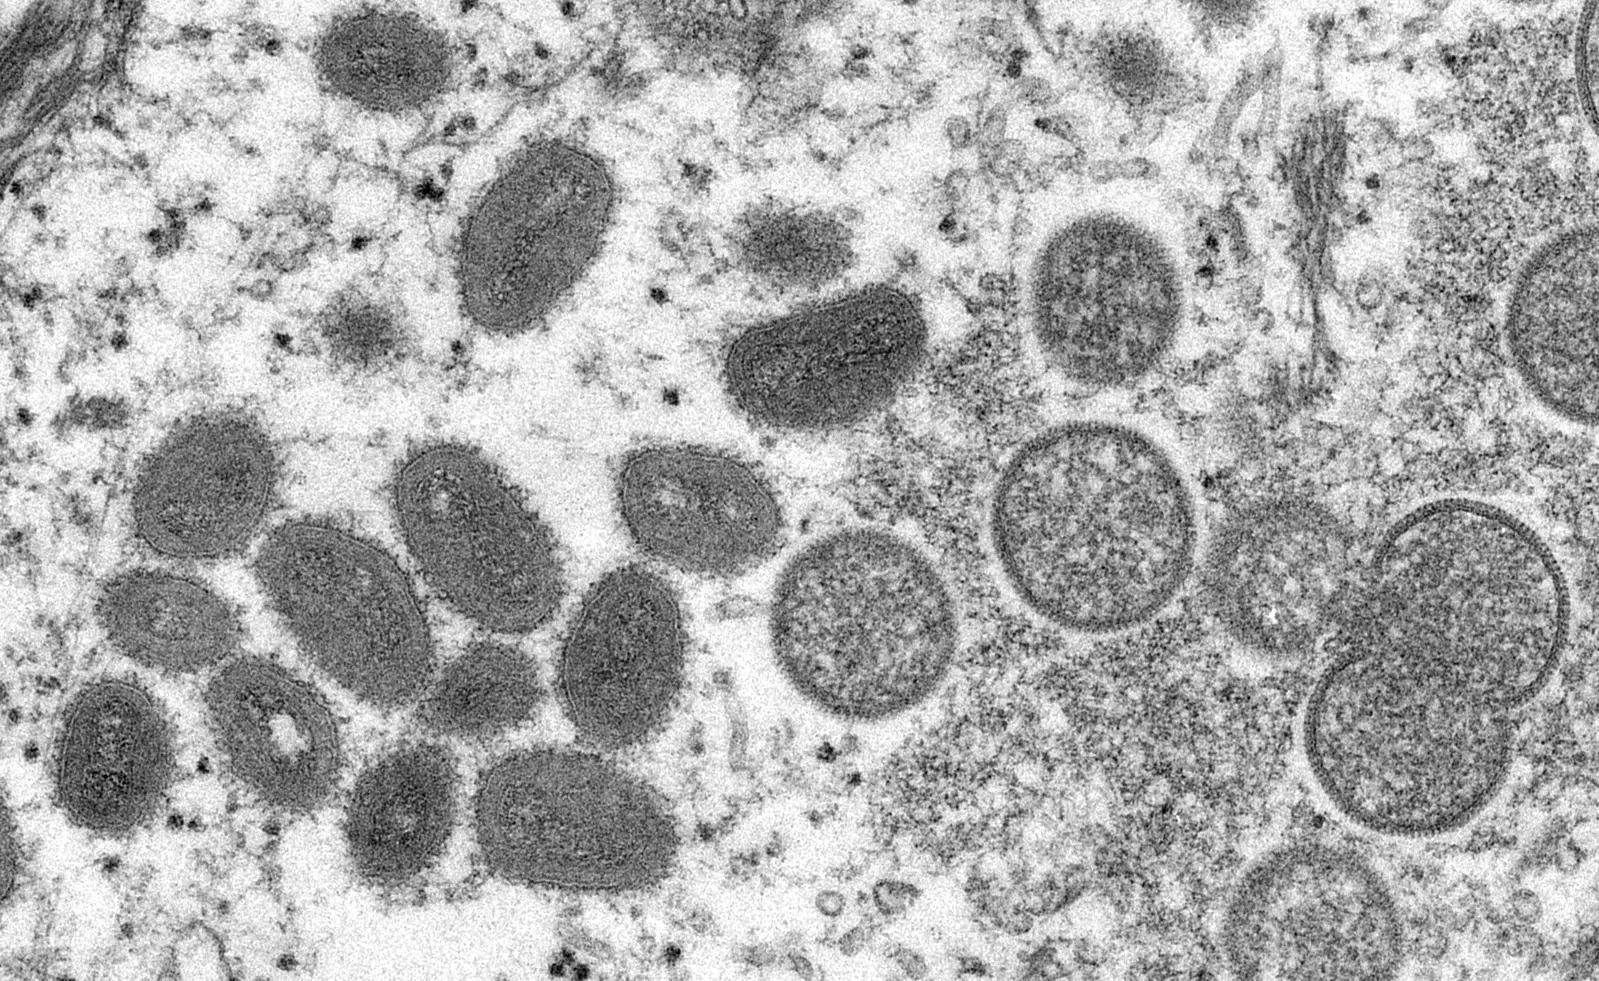 An undated electron microscopy image of mature monkeypox virions (left) and immature virions from a sample of human skin. (File photo: The New York Times)